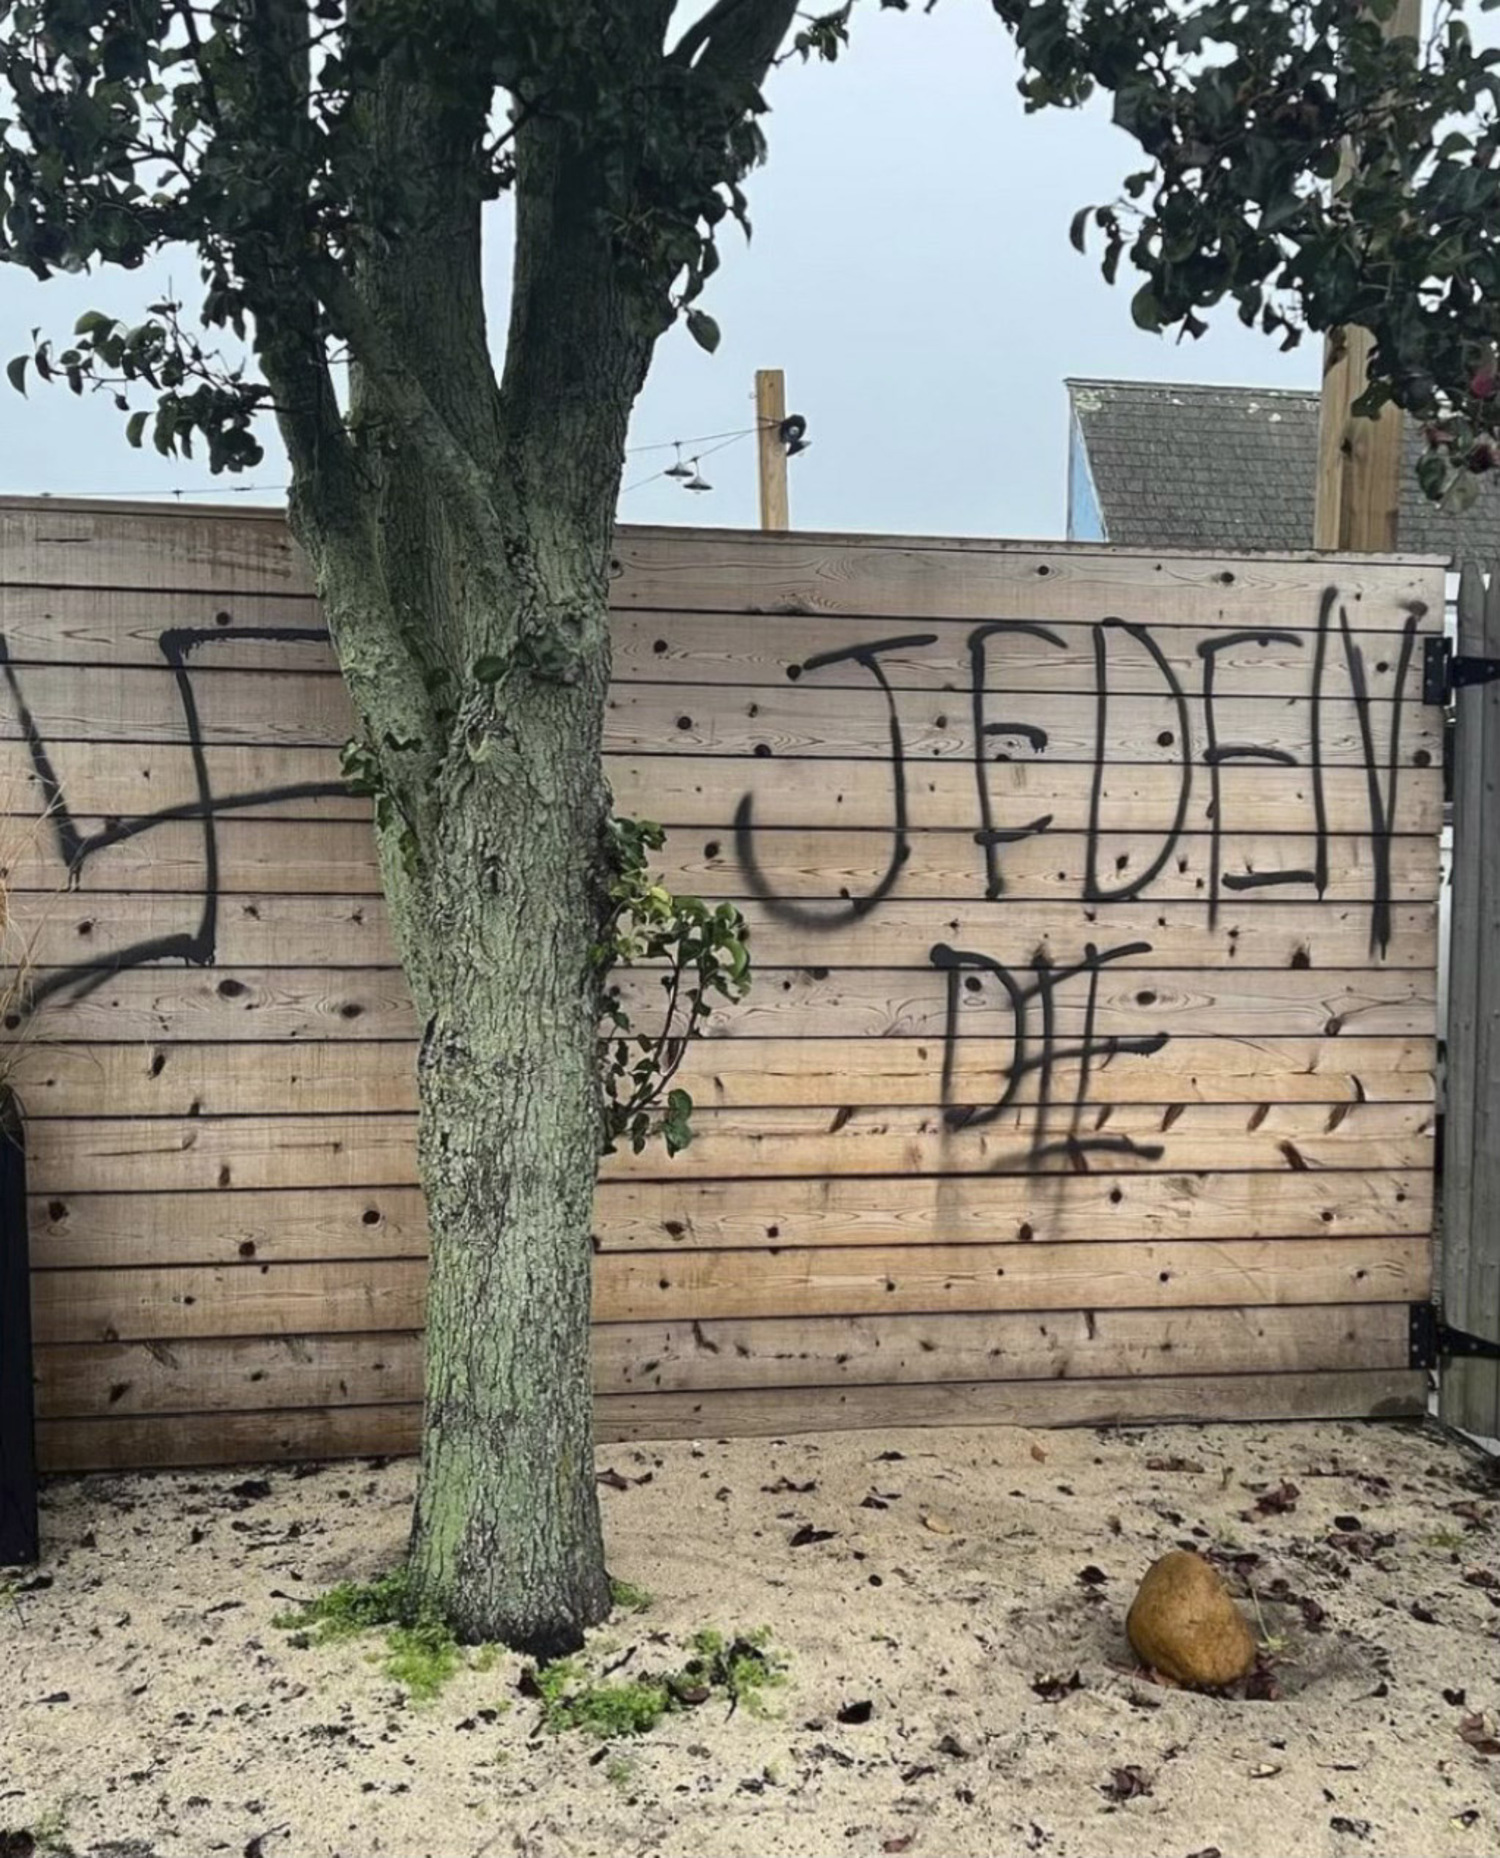 At least five locations discovered on Monday morning were tagged around Montauk with antisemitic symbols.